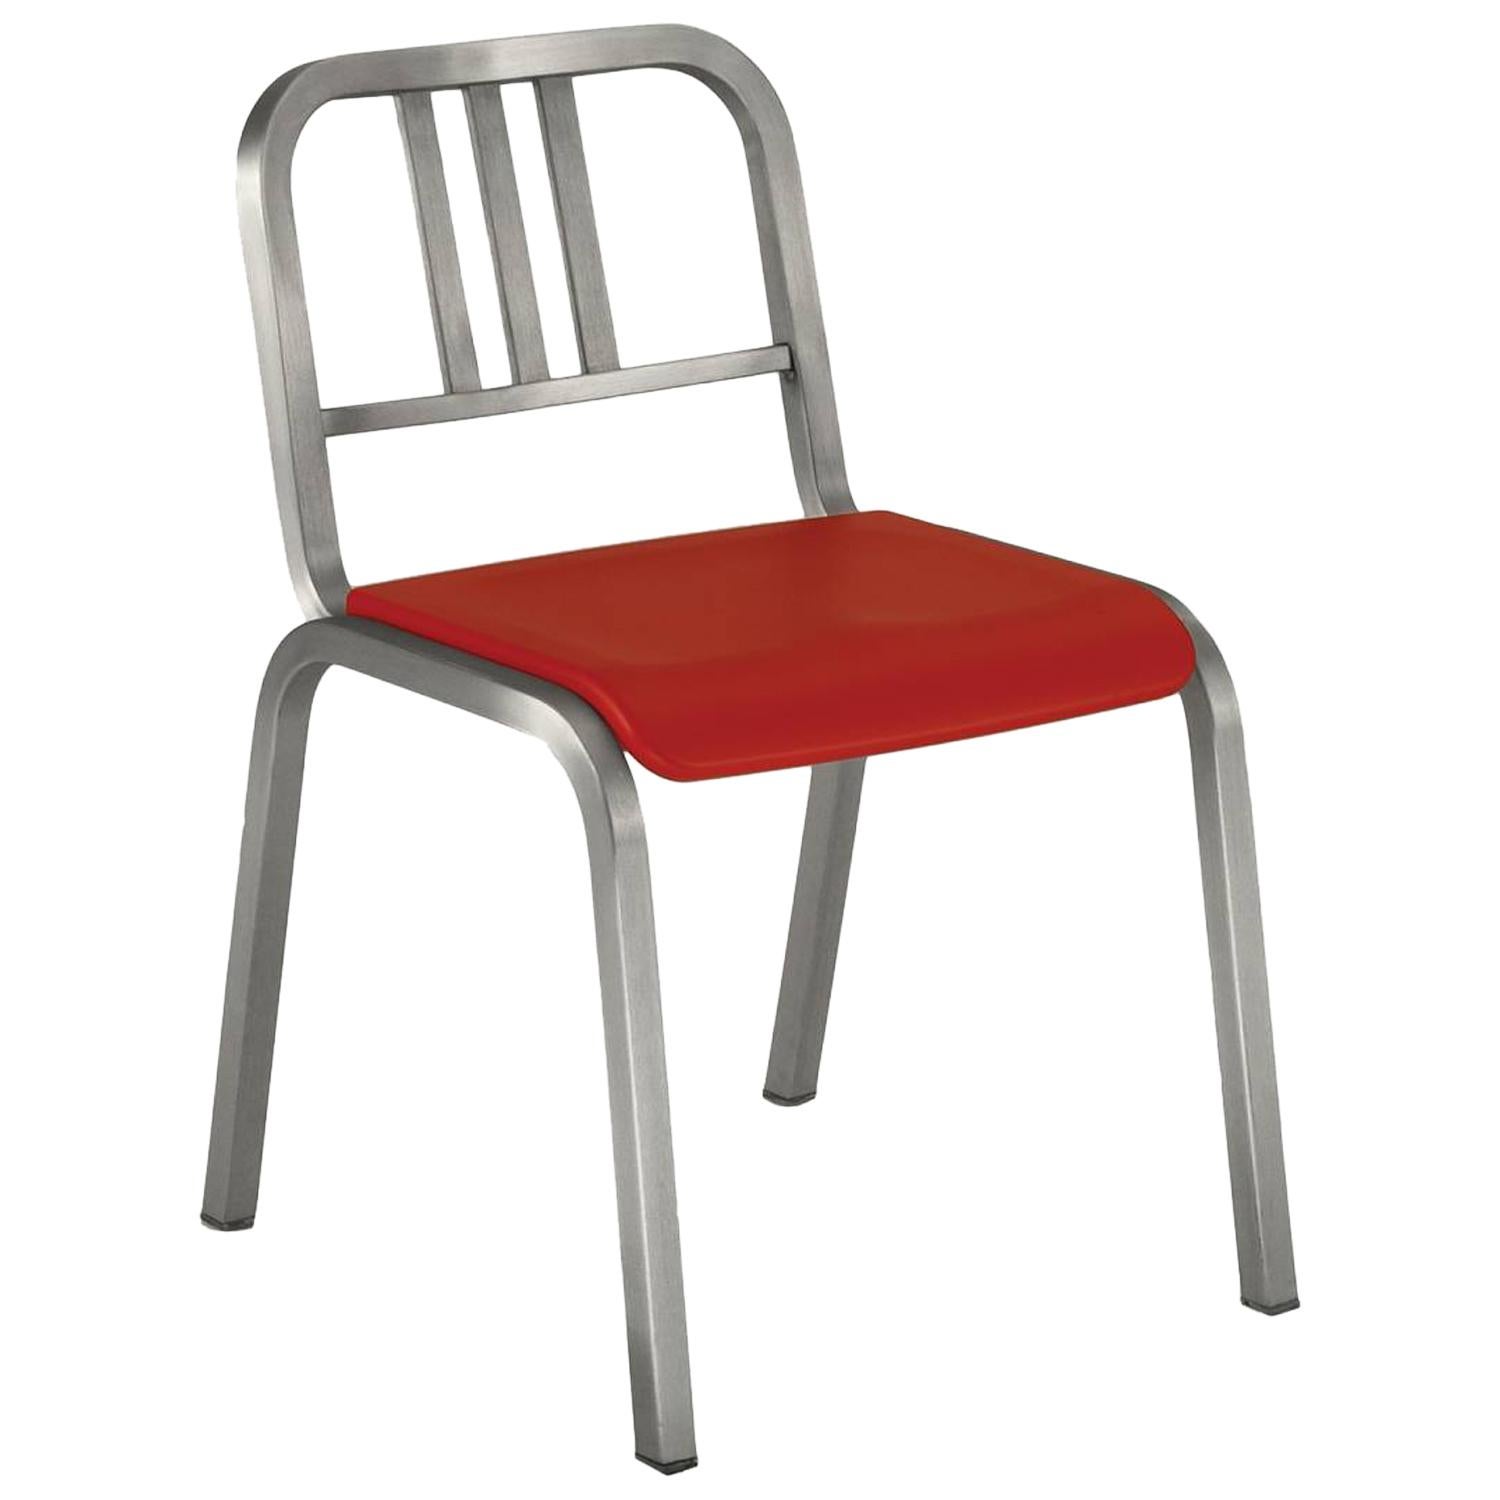 Emeco Nine-0™ Chair in Brushed Aluminum with Red Seat by Ettore Sottsass